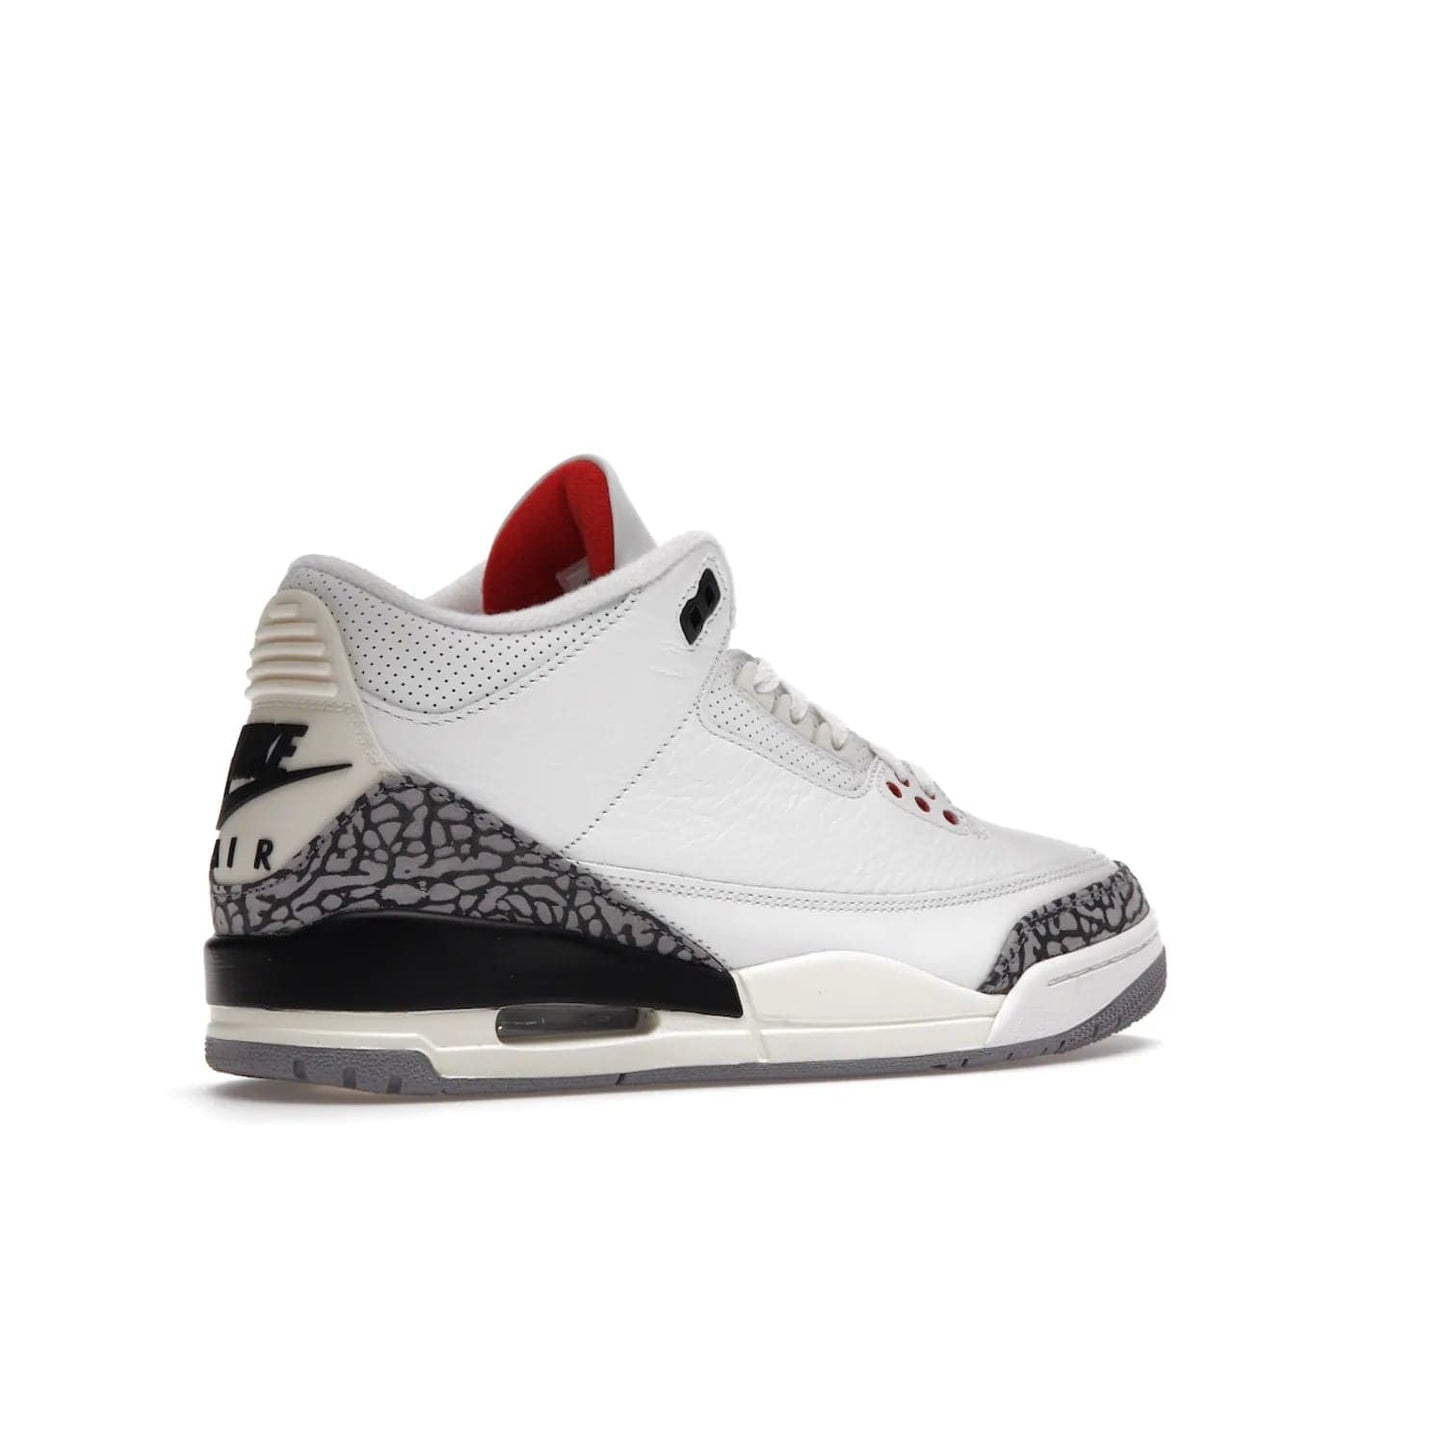 Jordan 3 Retro White Cement Reimagined - Image 34 - Only at www.BallersClubKickz.com - The Reimagined Air Jordan 3 Retro in a Summit White/Fire Red/Black/Cement Grey colorway is launching on March 11, 2023. Featuring a white leather upper, off-white midsoles and heel tabs, this vintage-look sneaker is a must-have.